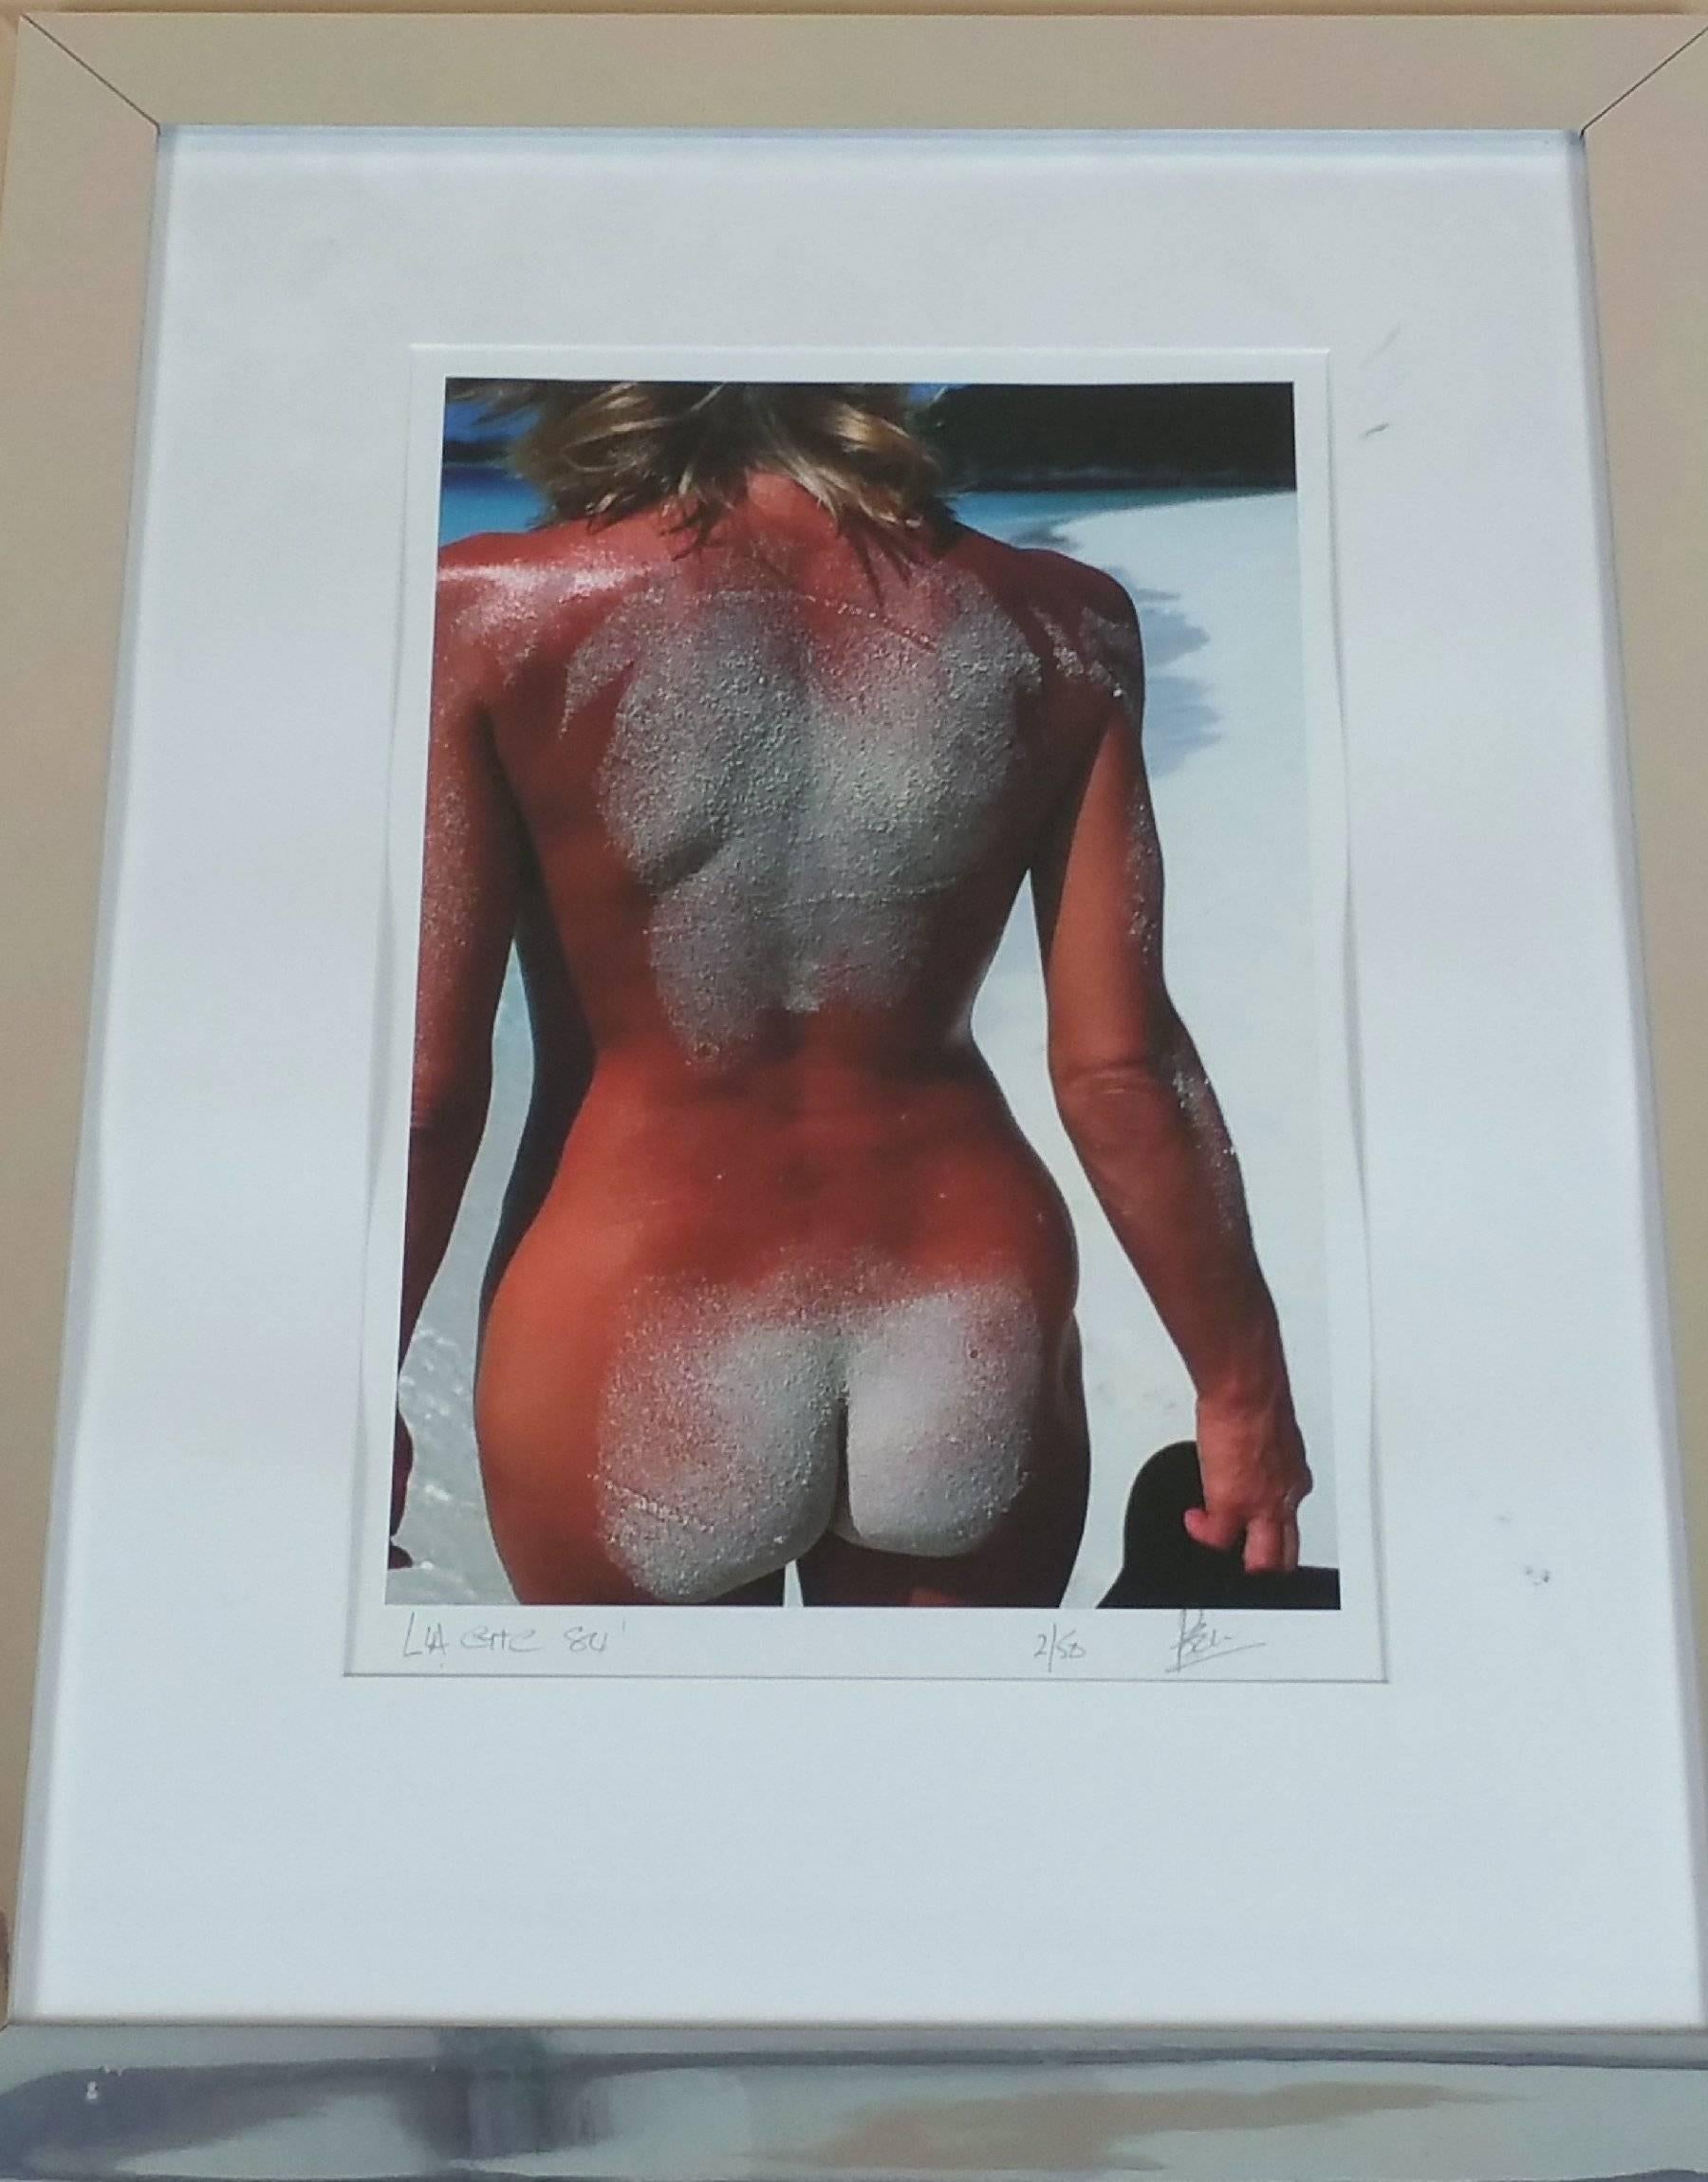 One of two original photographs signed and dated by the artist, which is ‘Poole’, dated 1984. The color photograph depicts the back of a nude woman walking on a beach, possibly on the west coast of the United States. The picture measures 28 ½ inches